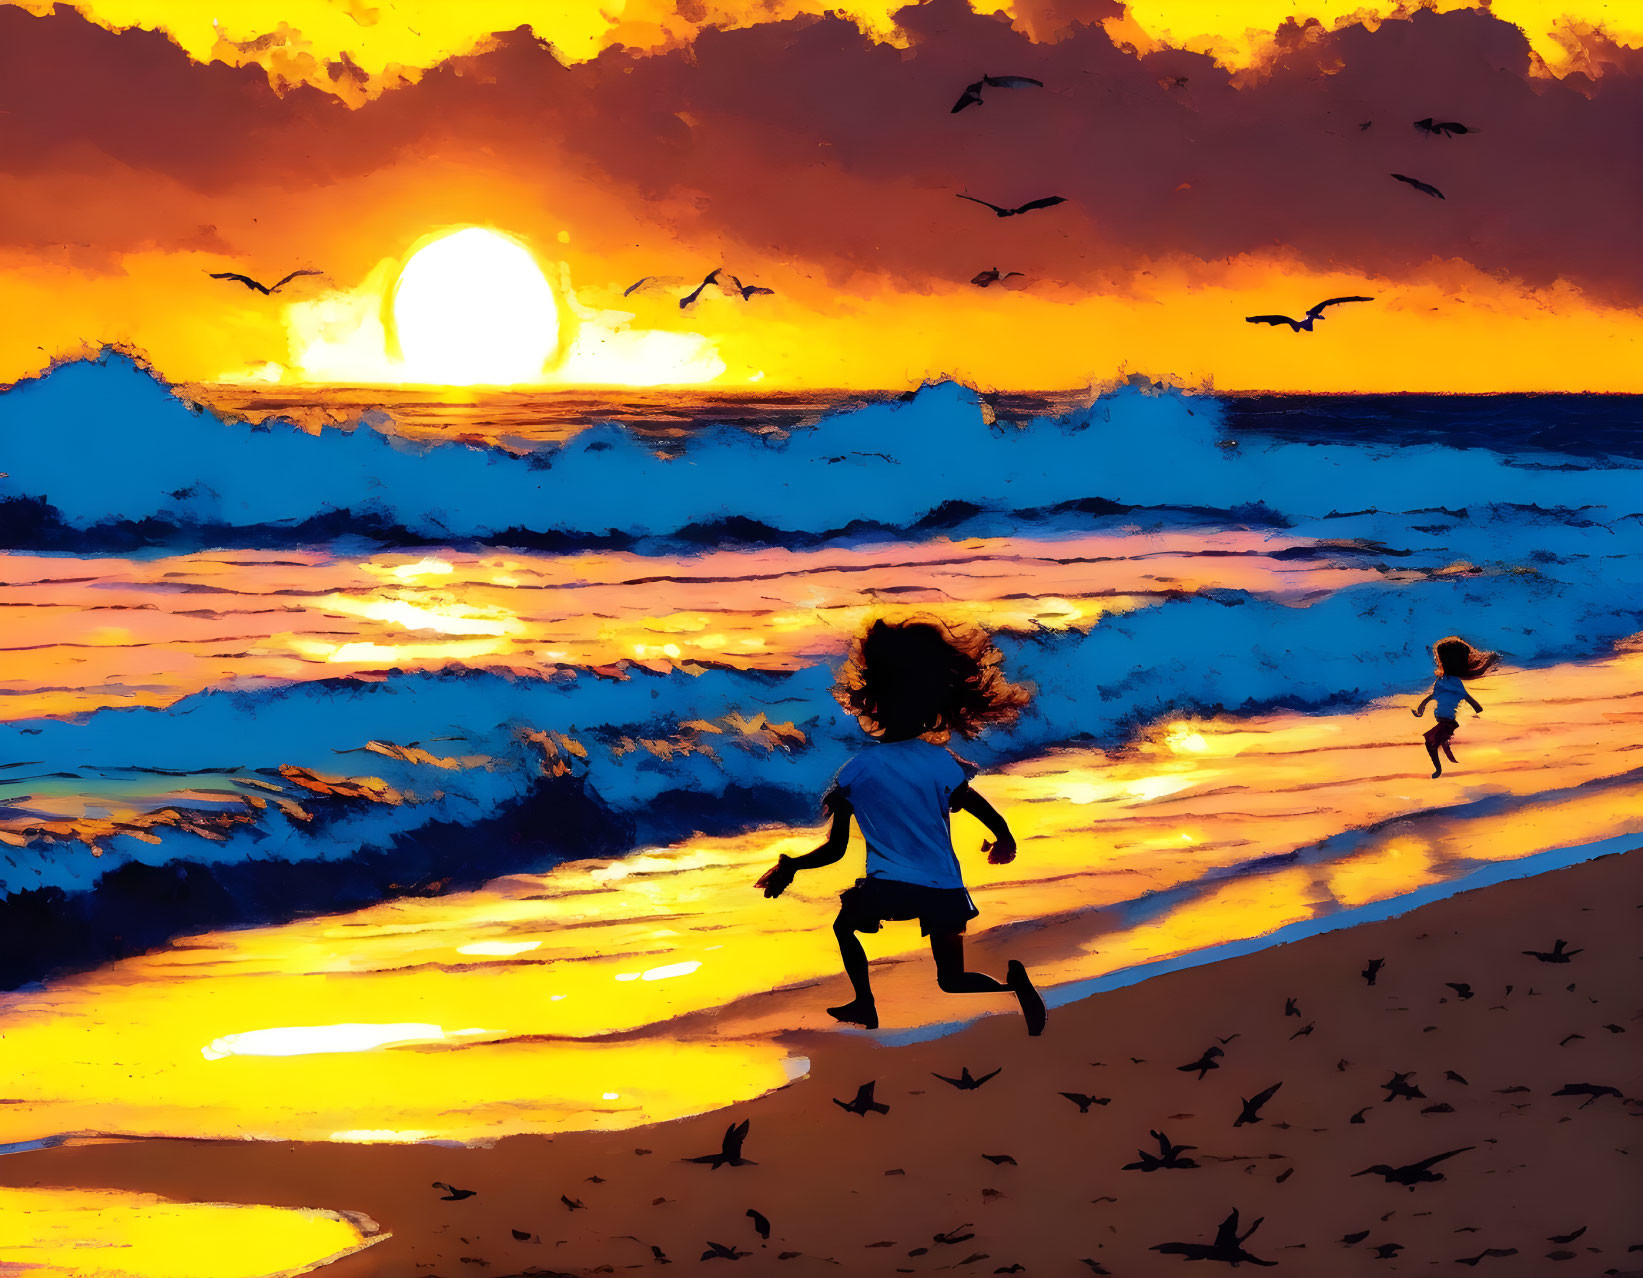 Children running on vibrant beach at sunset with bird silhouettes.